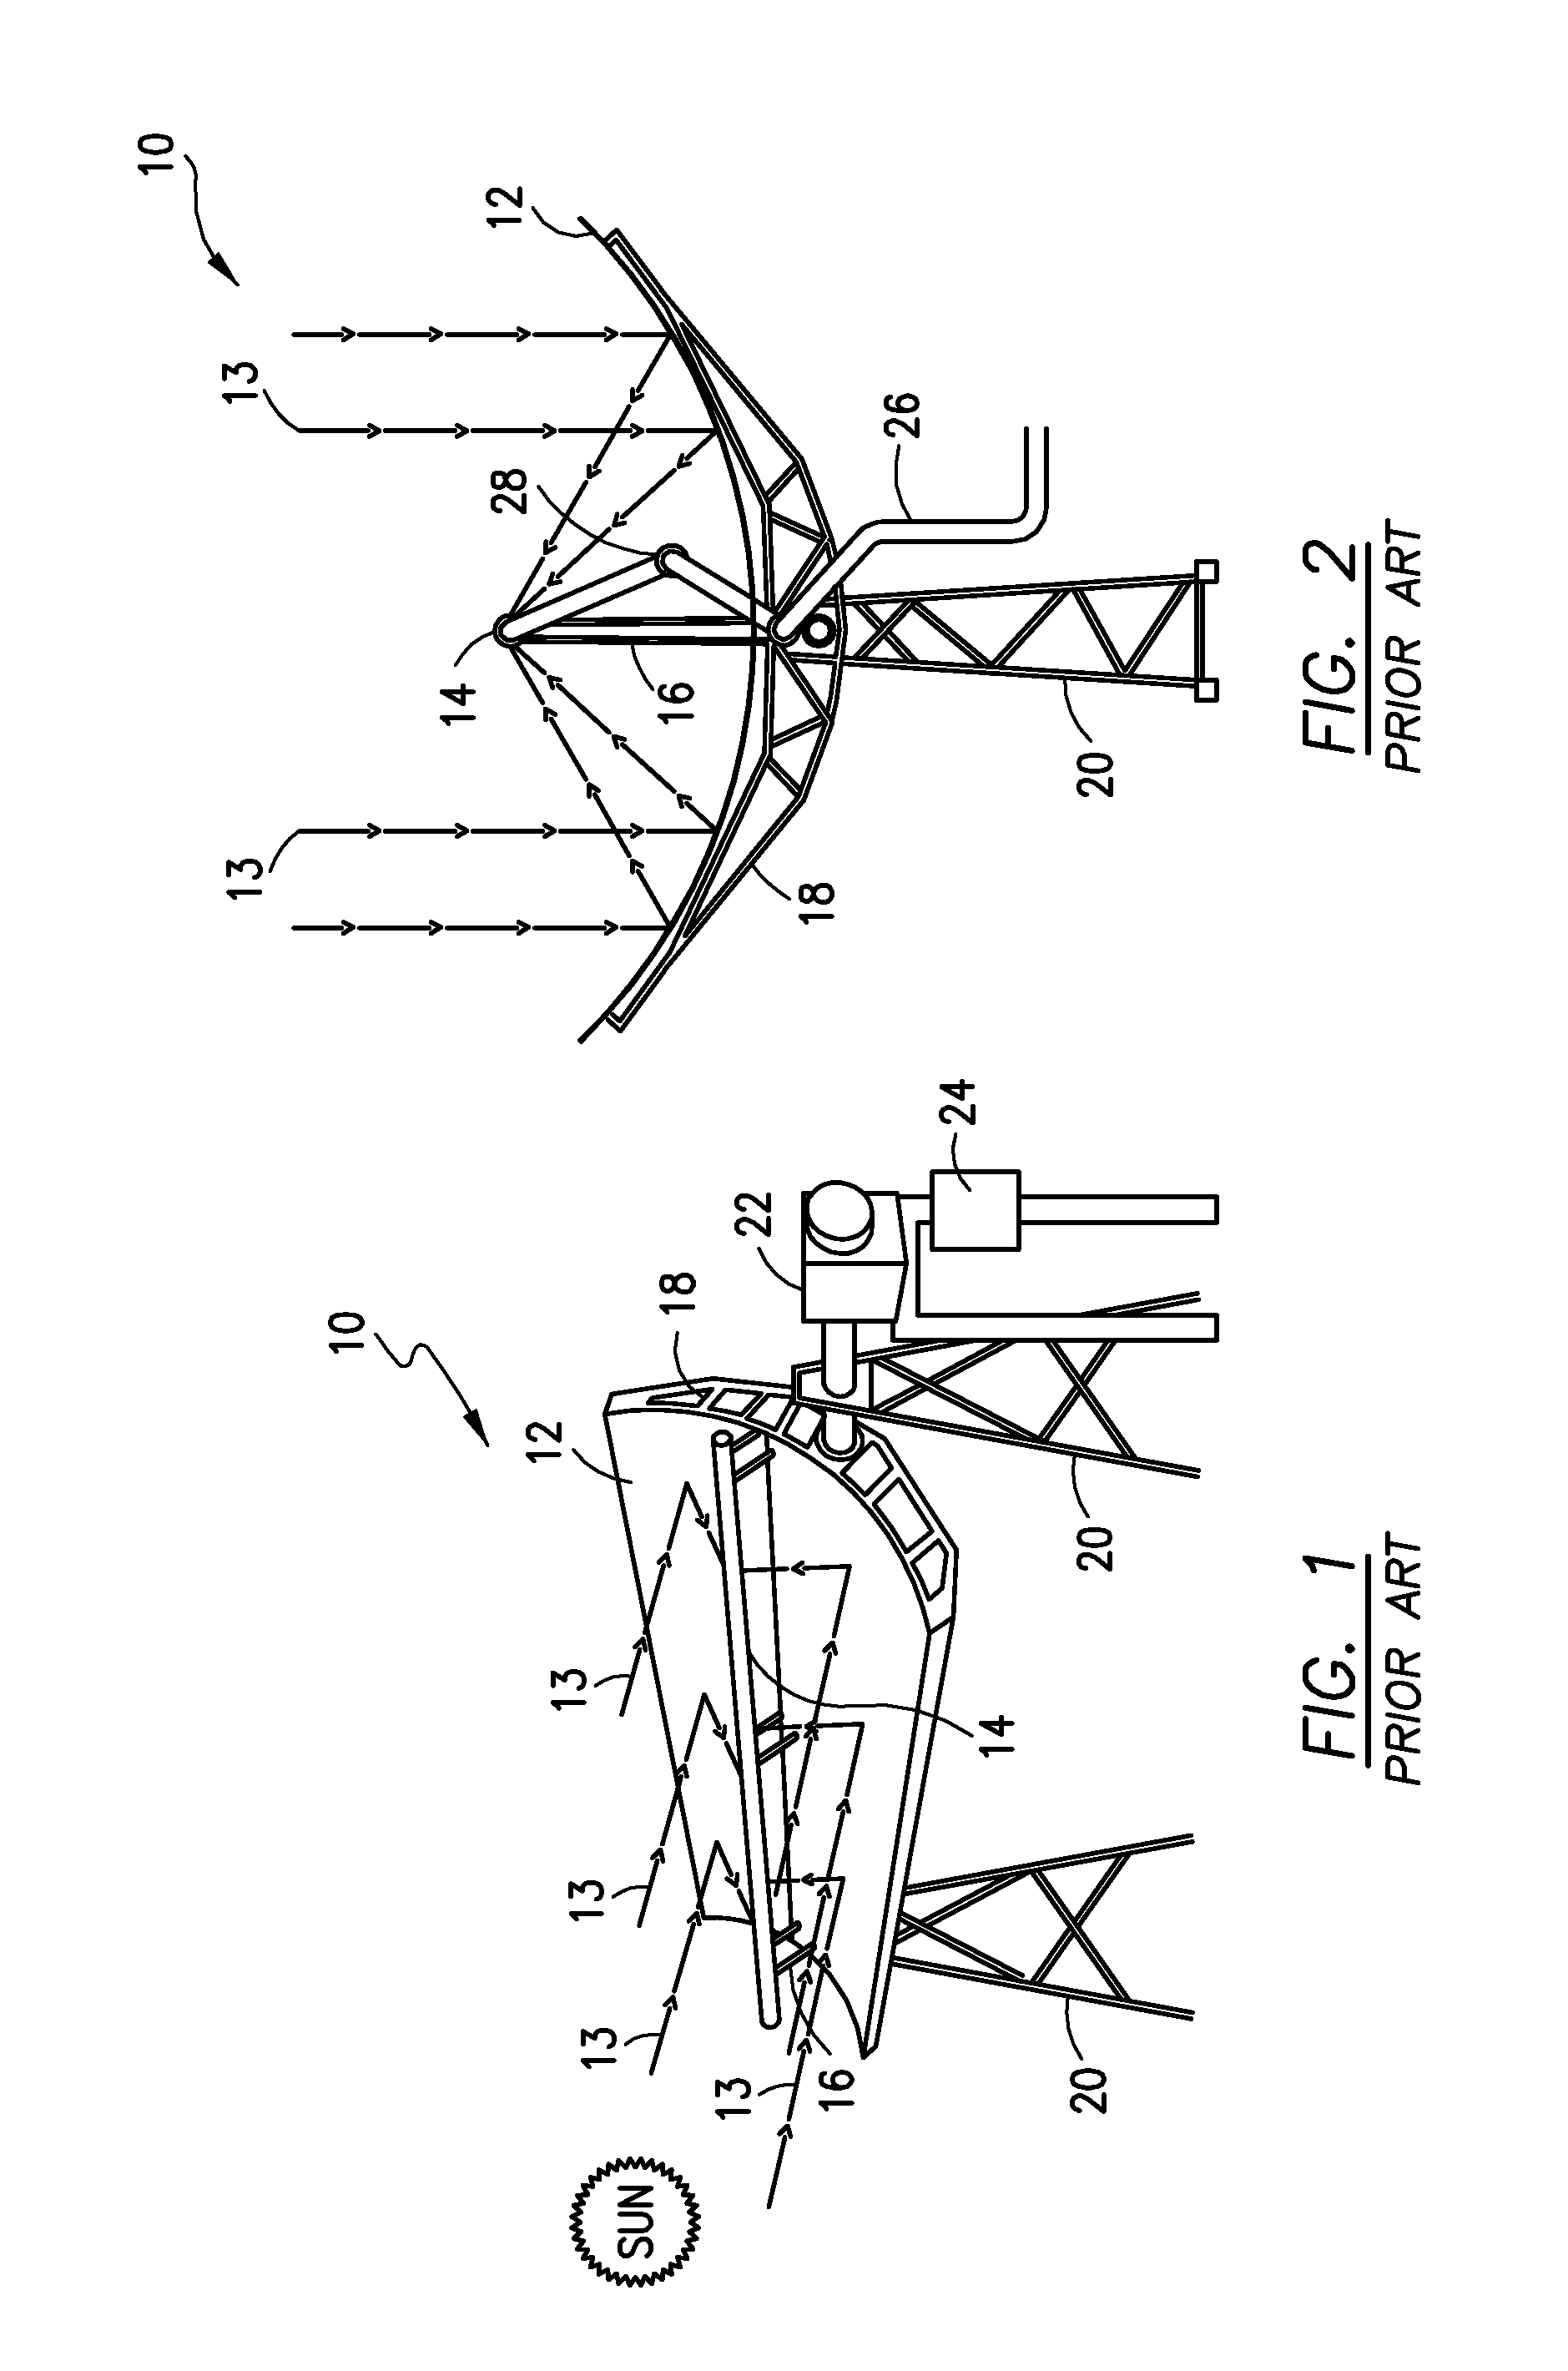 Concentrated solar power generation system with distributed generation